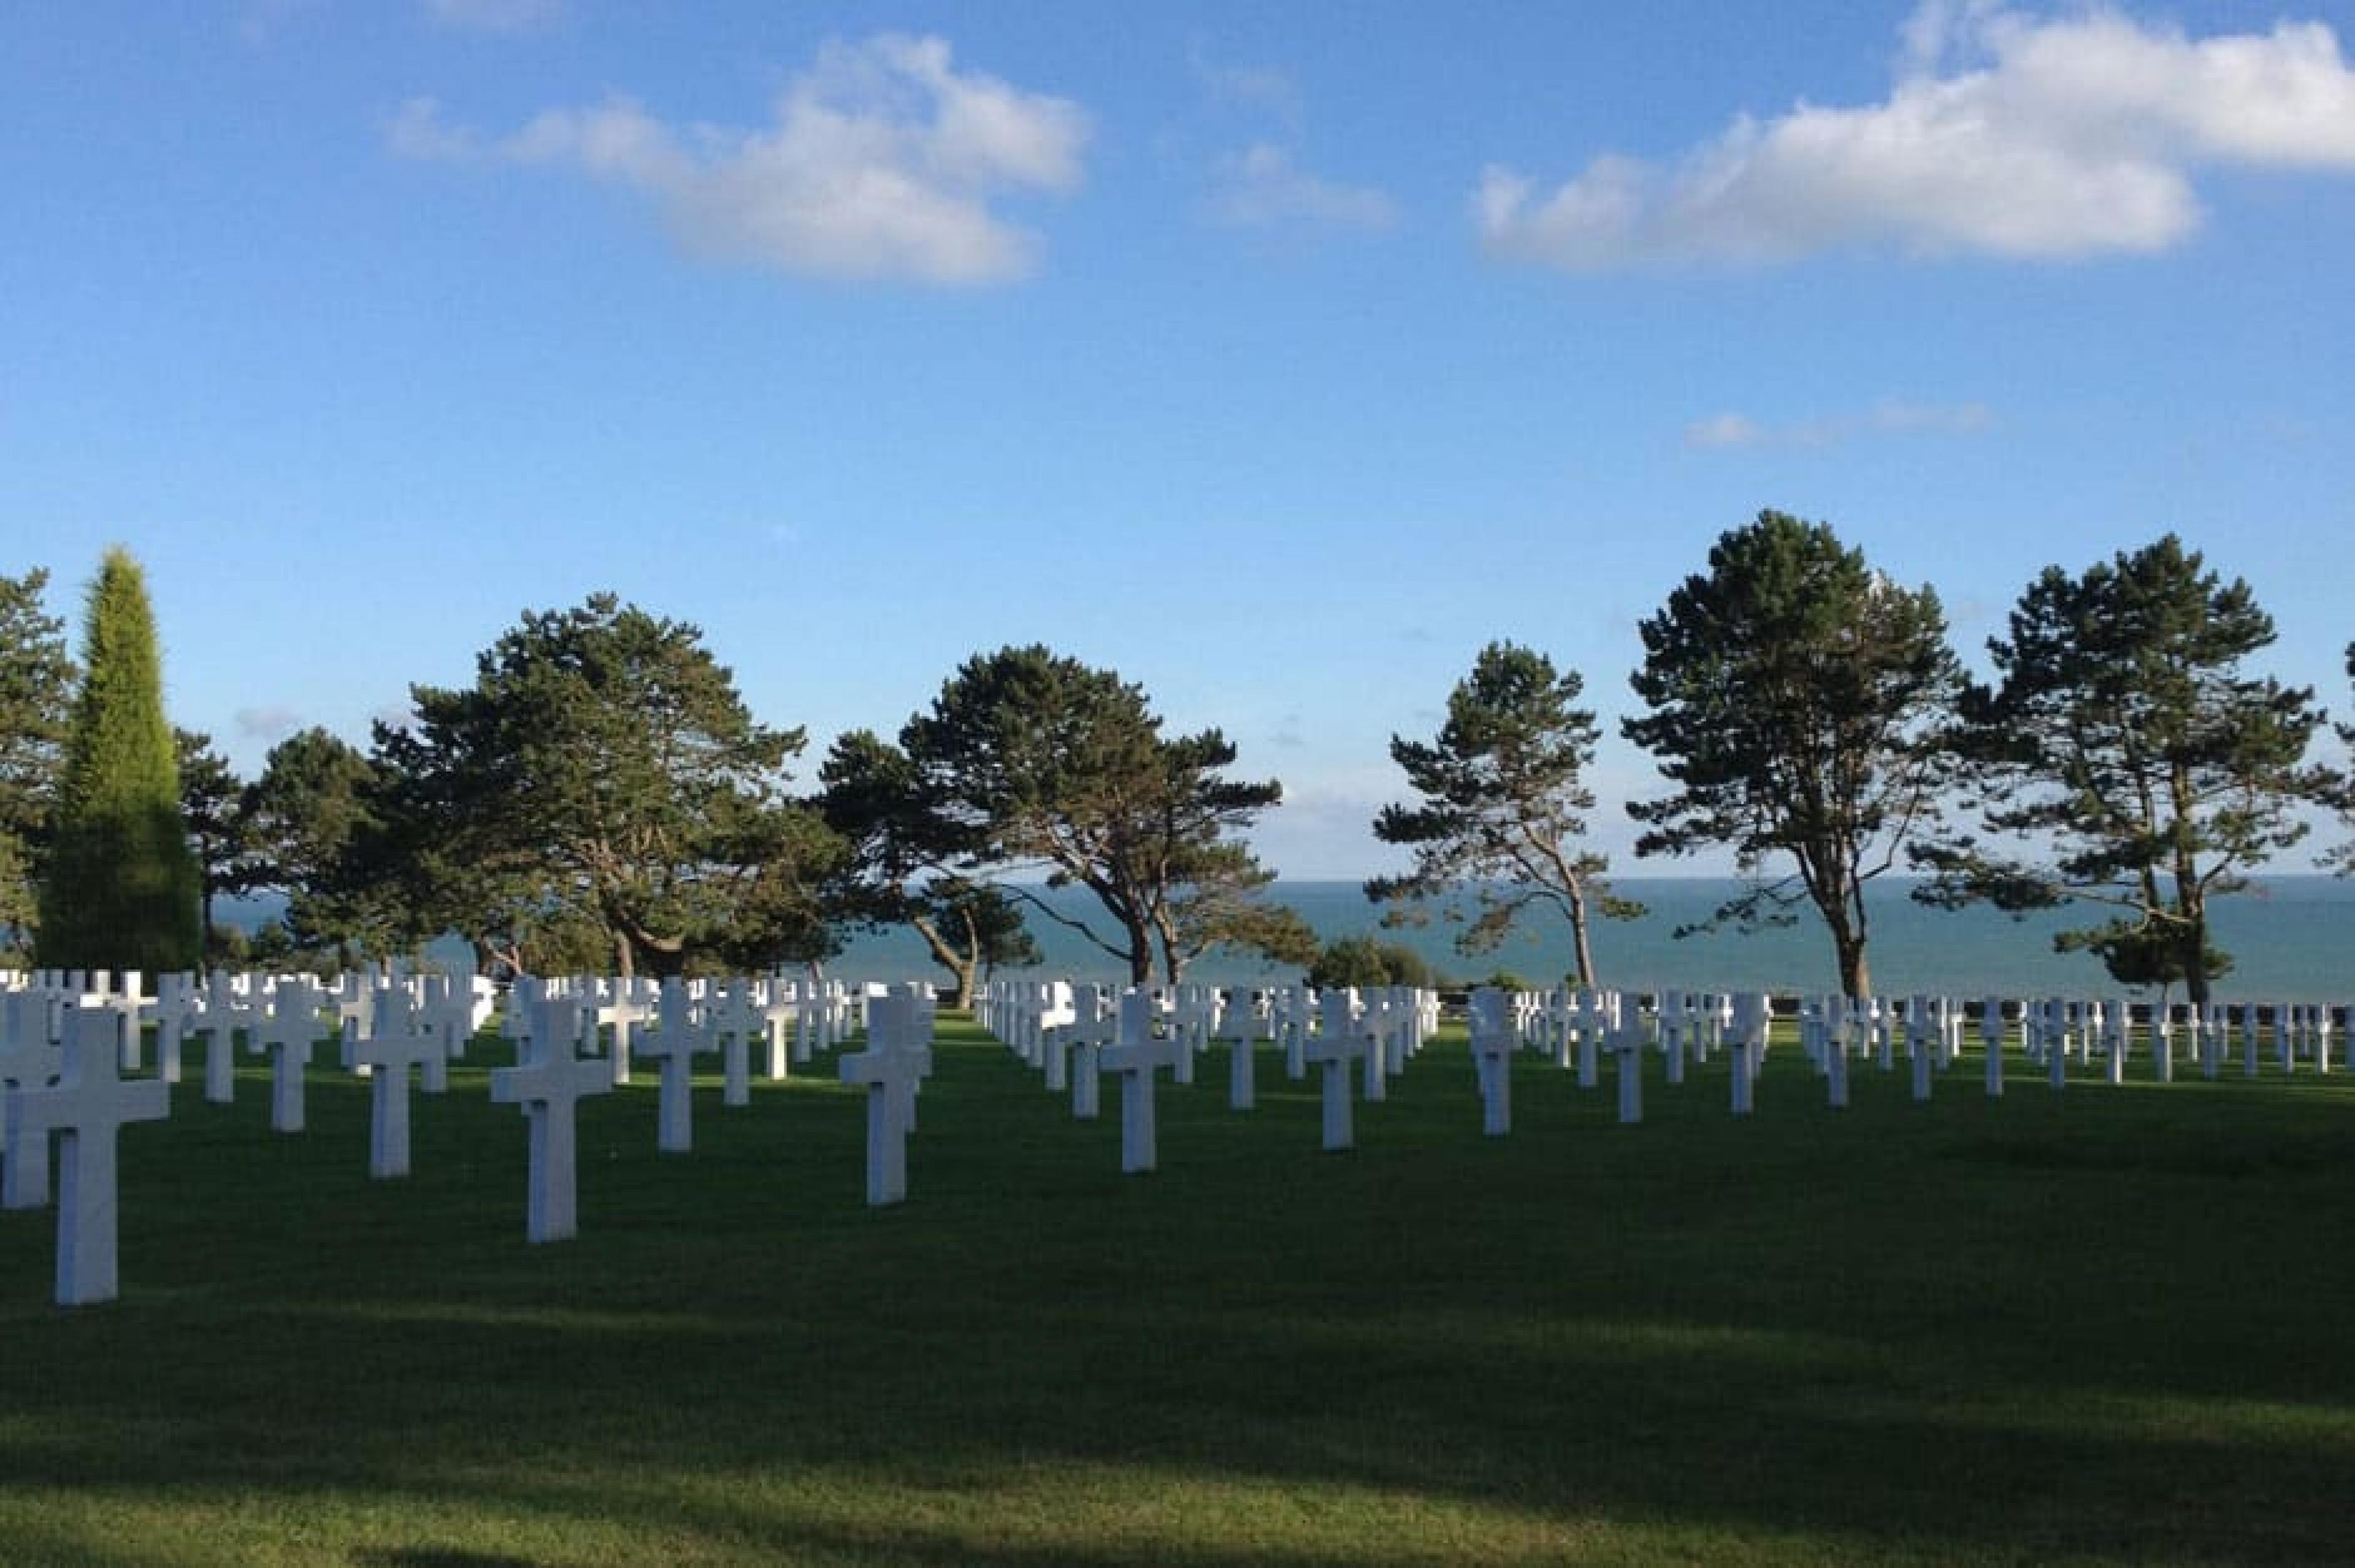 Aerial View - Indagare Tours: The American Cemetery at Colleville-sur-Mer,Normandy, France